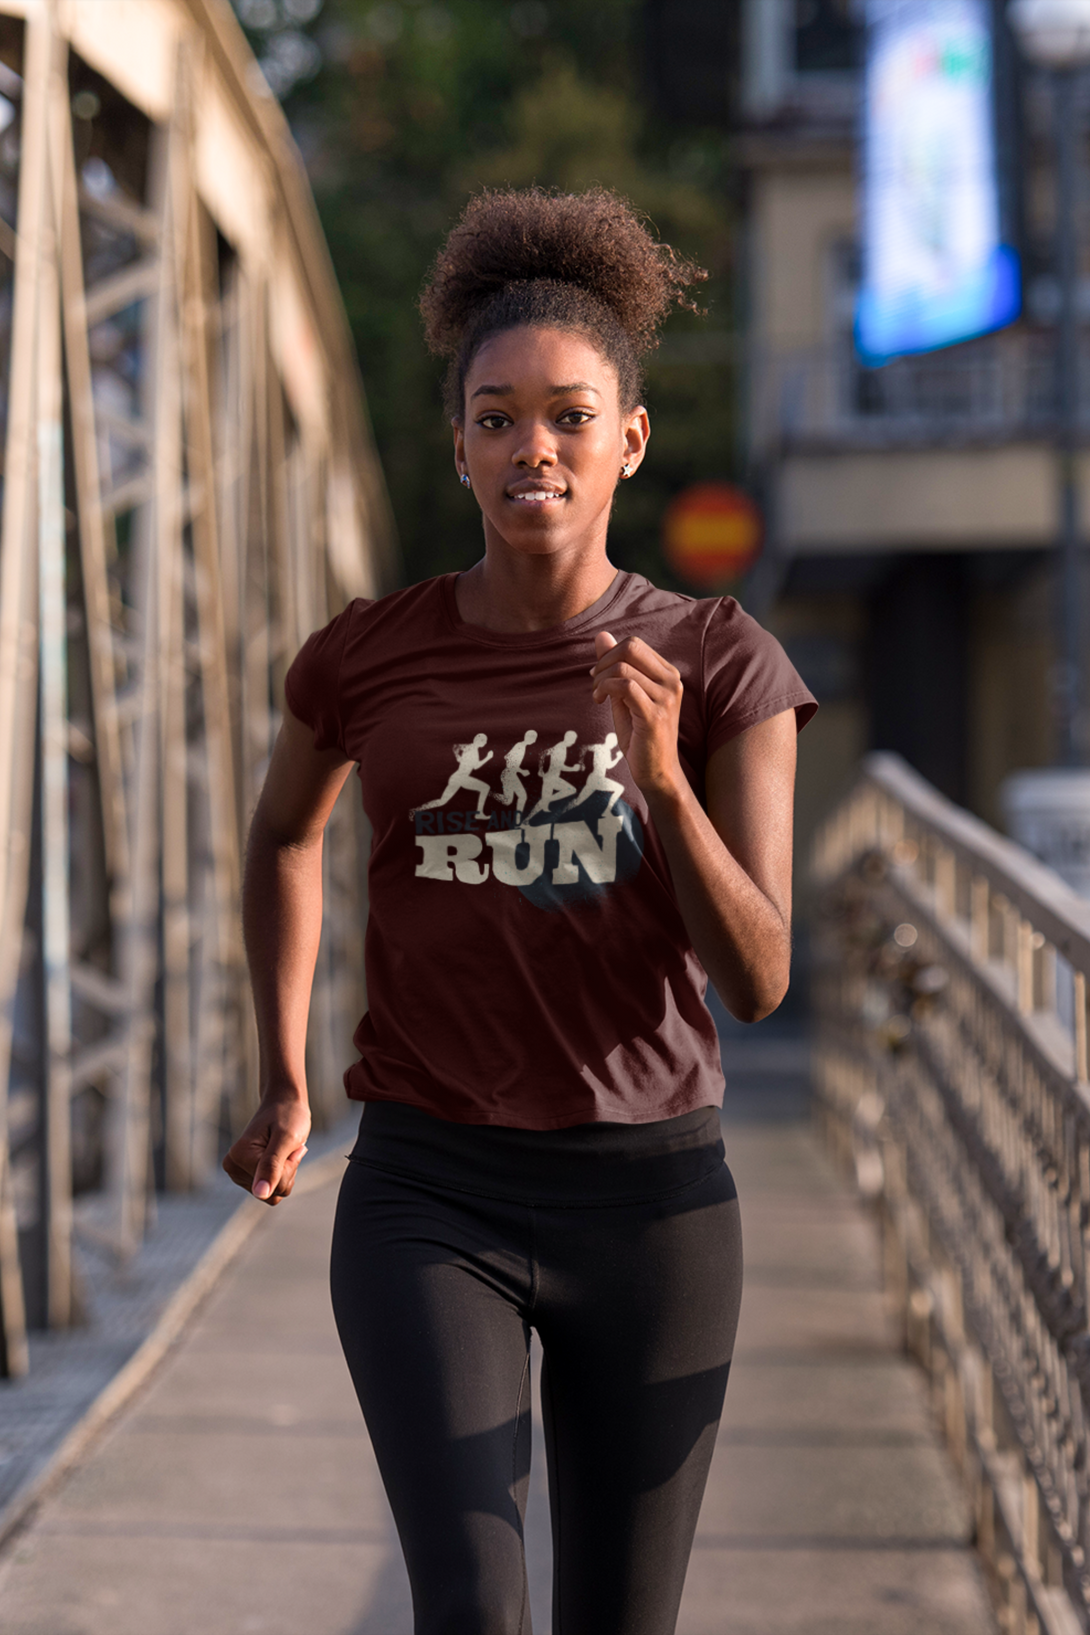 Rise And Run Printed T-Shirt For Women - WowWaves - 4